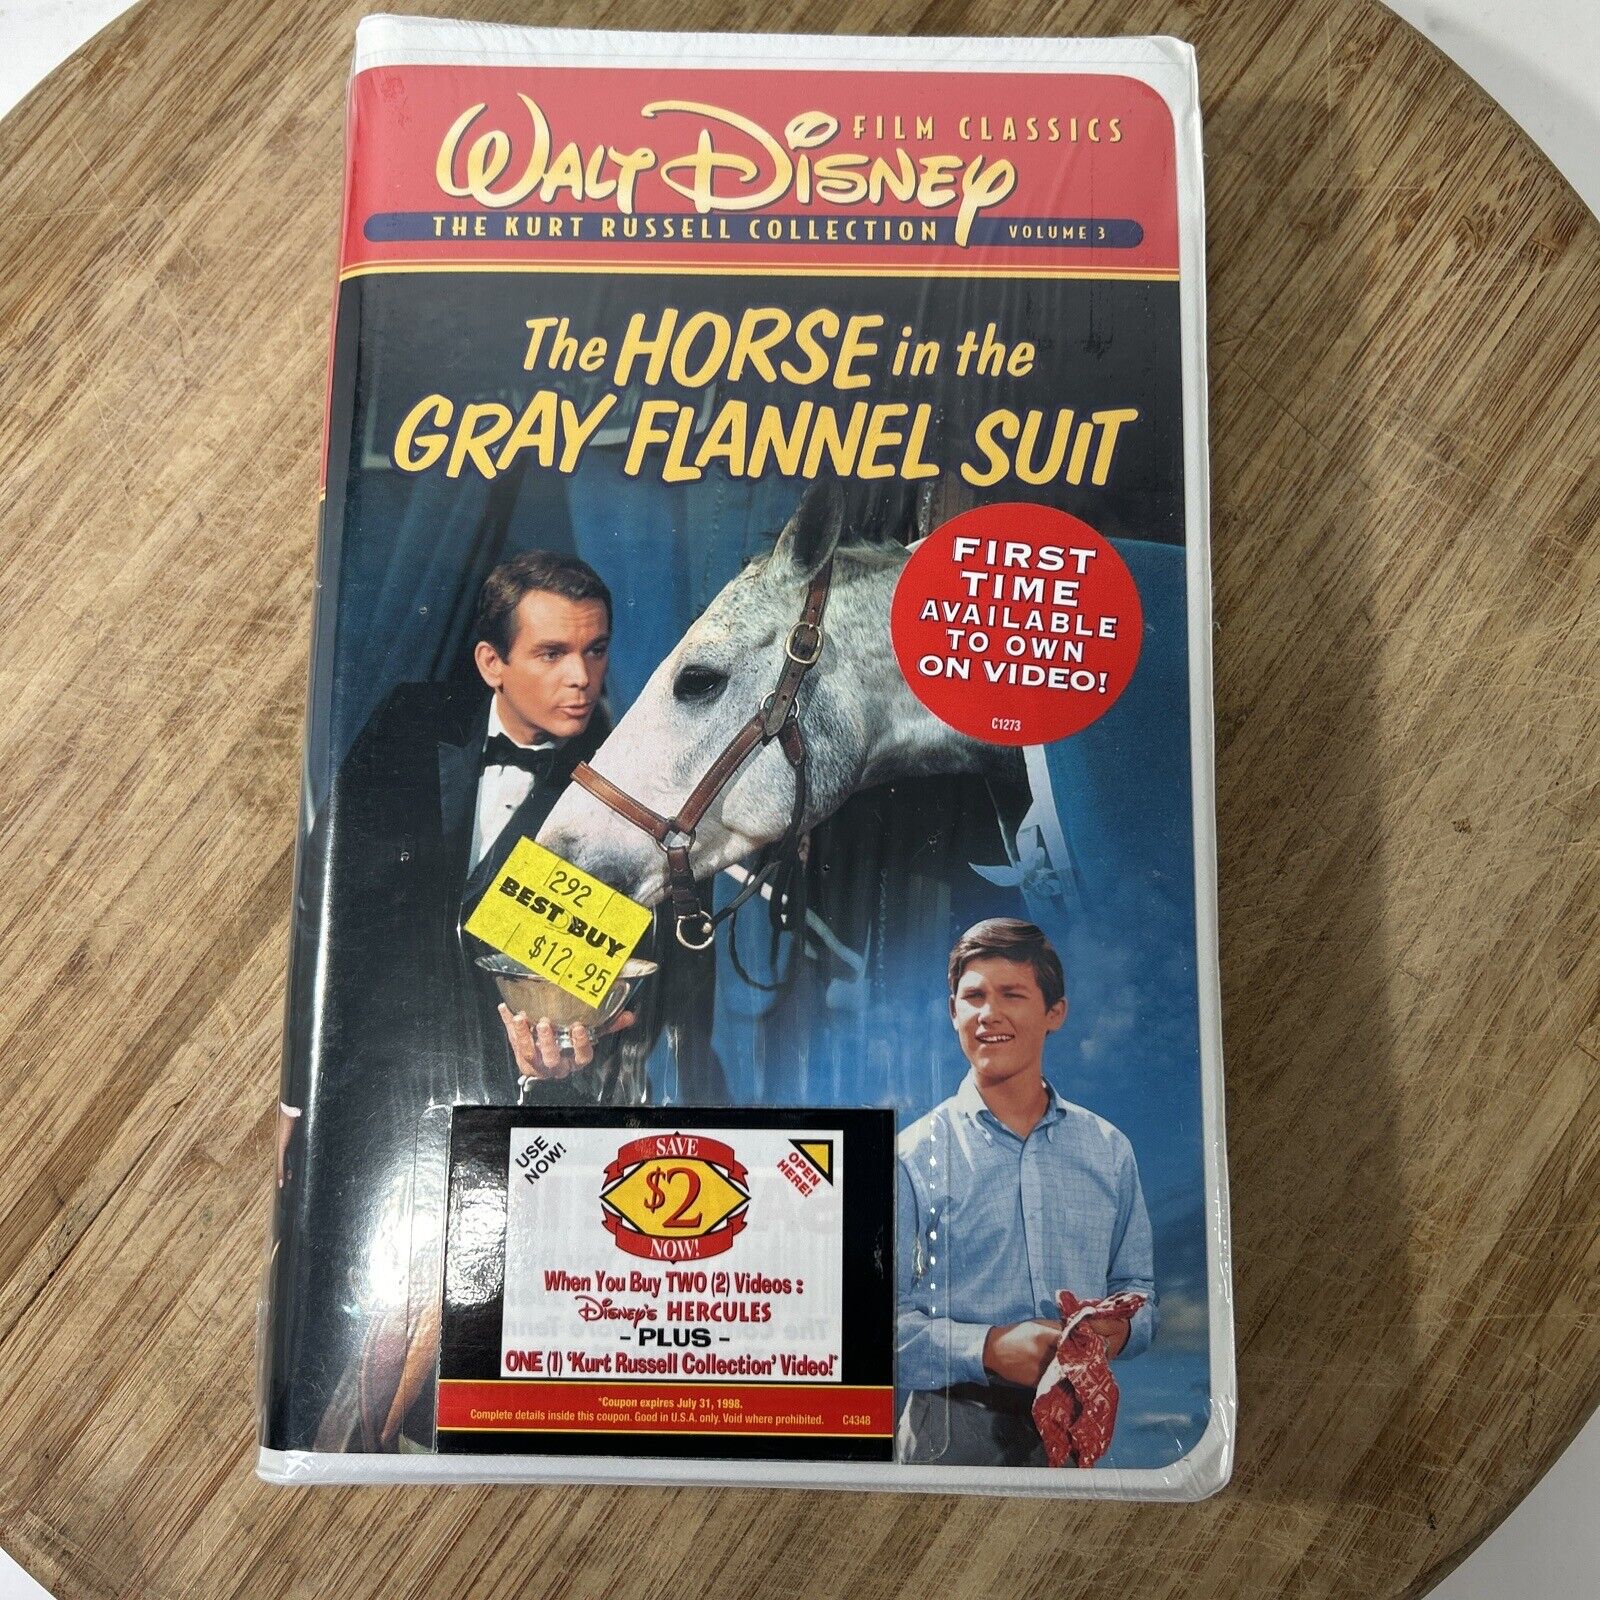 The Horse in the Gray Flannel Suit SEALED RARE Walt Disney Film Classics